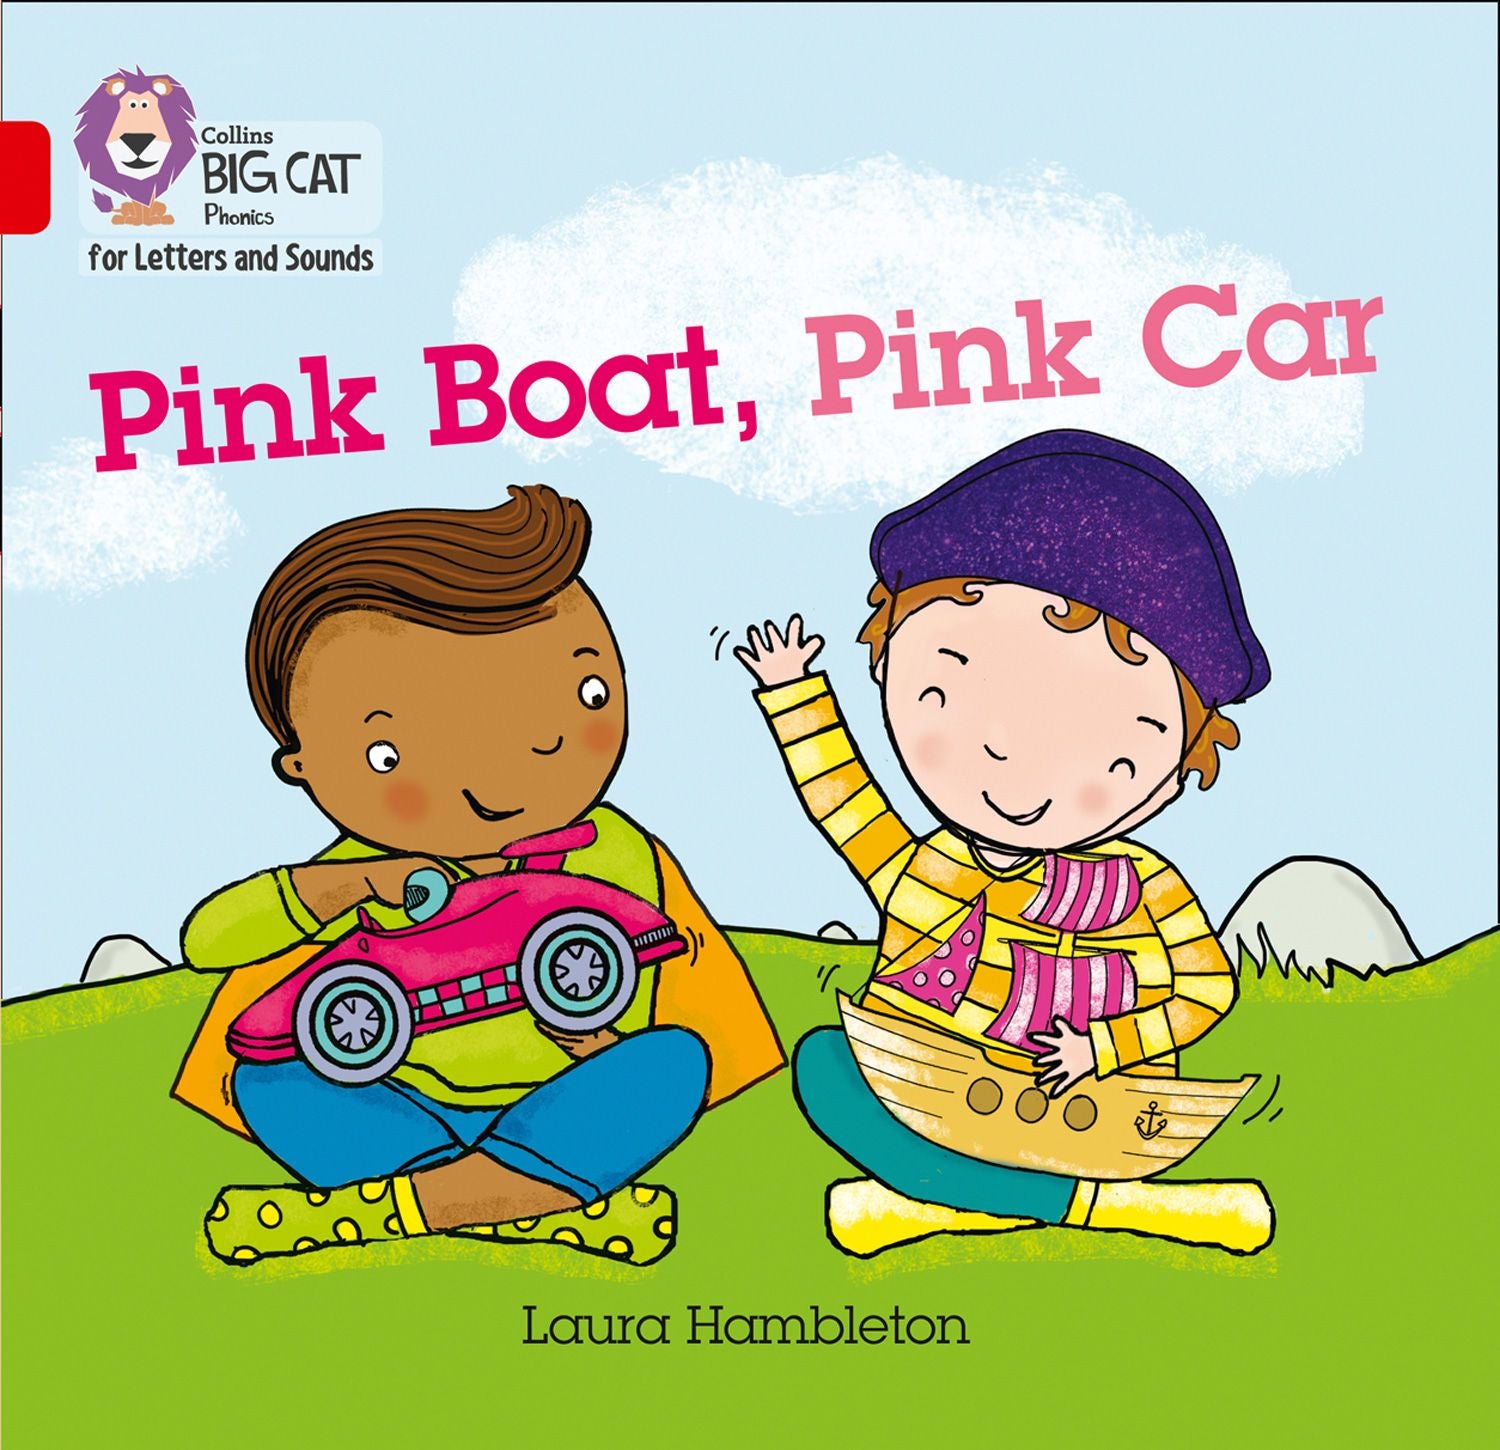 Collins Big Cat Phonics for Letters and Sounds - Pink Boat, Pink Car: Band  02B/Red B